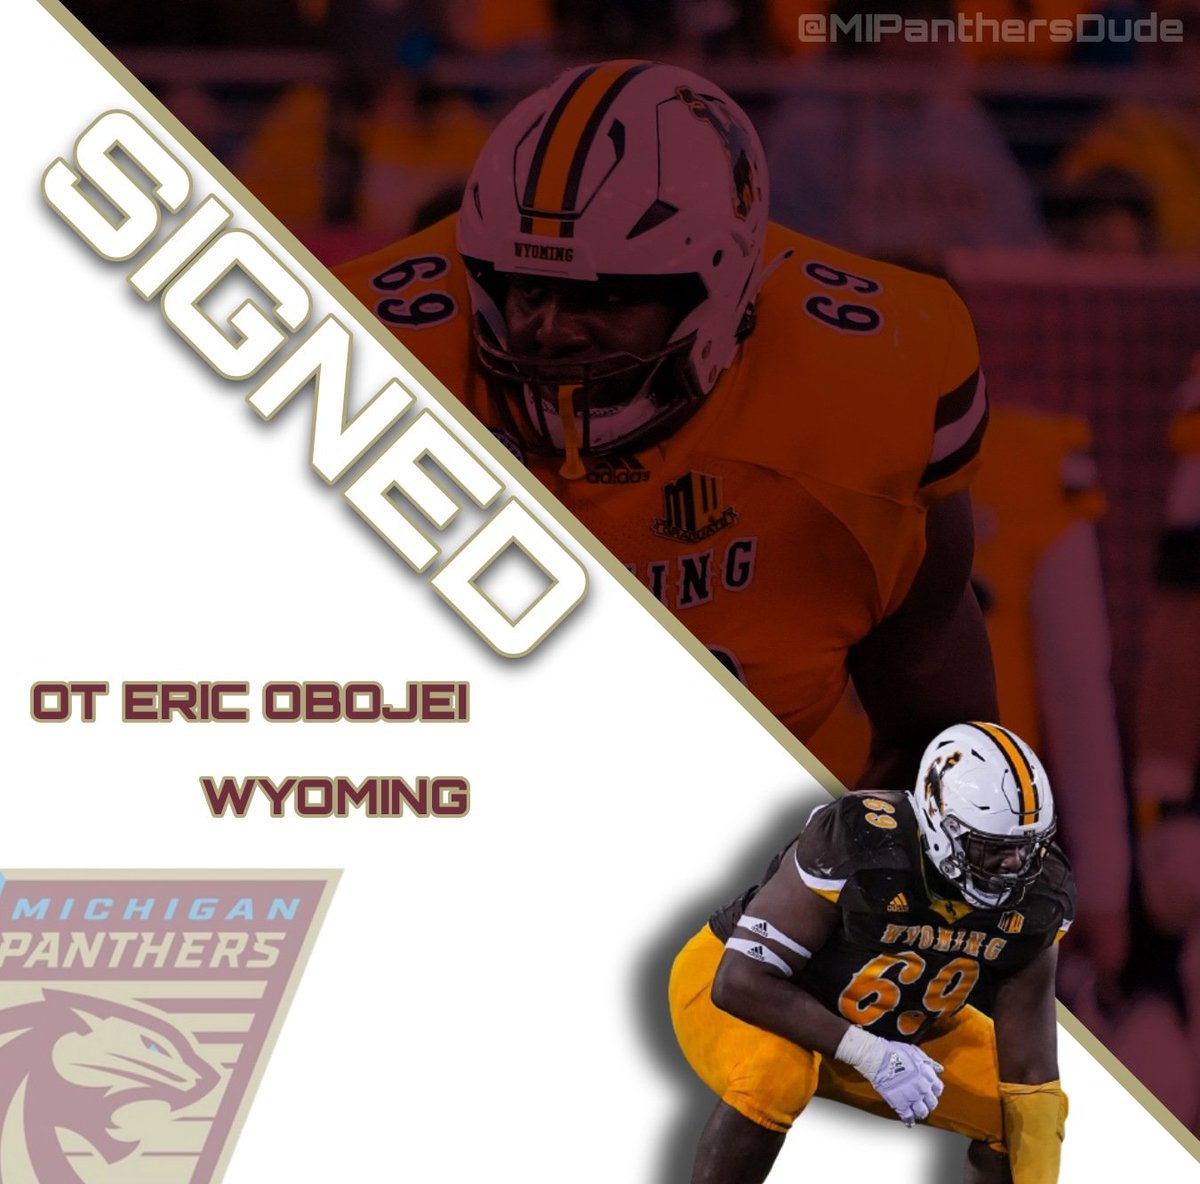 The Michigan Panthers have signed former Brown QB E. J. Perry and former Wyoming OT Eric Obojei. Perry was a standout in the Ivy League, and Obojei bolstered a front line blocking for Wyoming's star RBs.

Welcome, E. J. Perry and @egrizzley69!

#LetsHunt